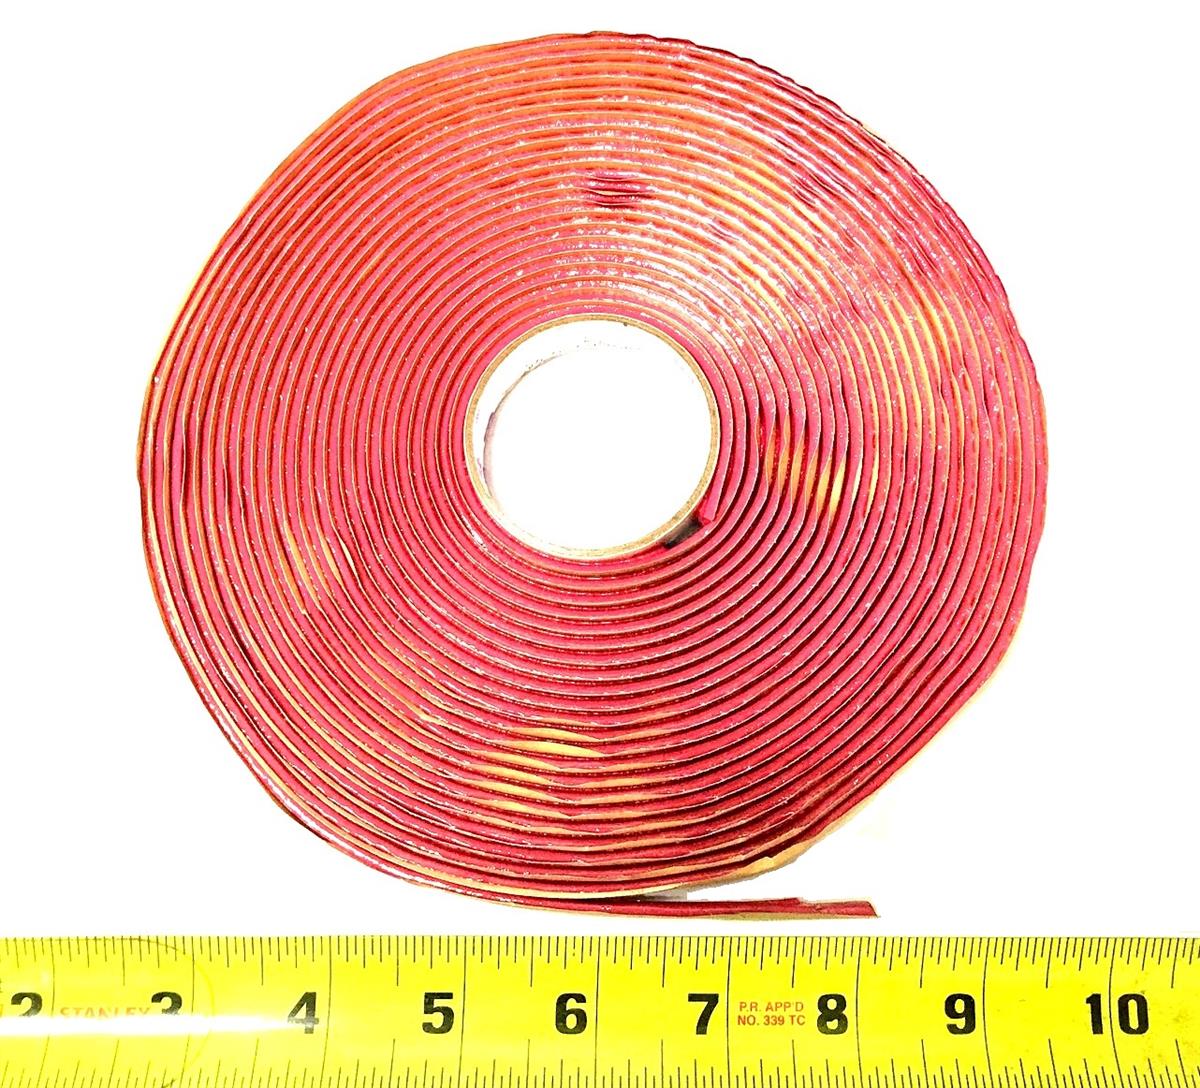 SP-2255 | SP-2255  Pink Rubber Adhesive Tape (6).jpg